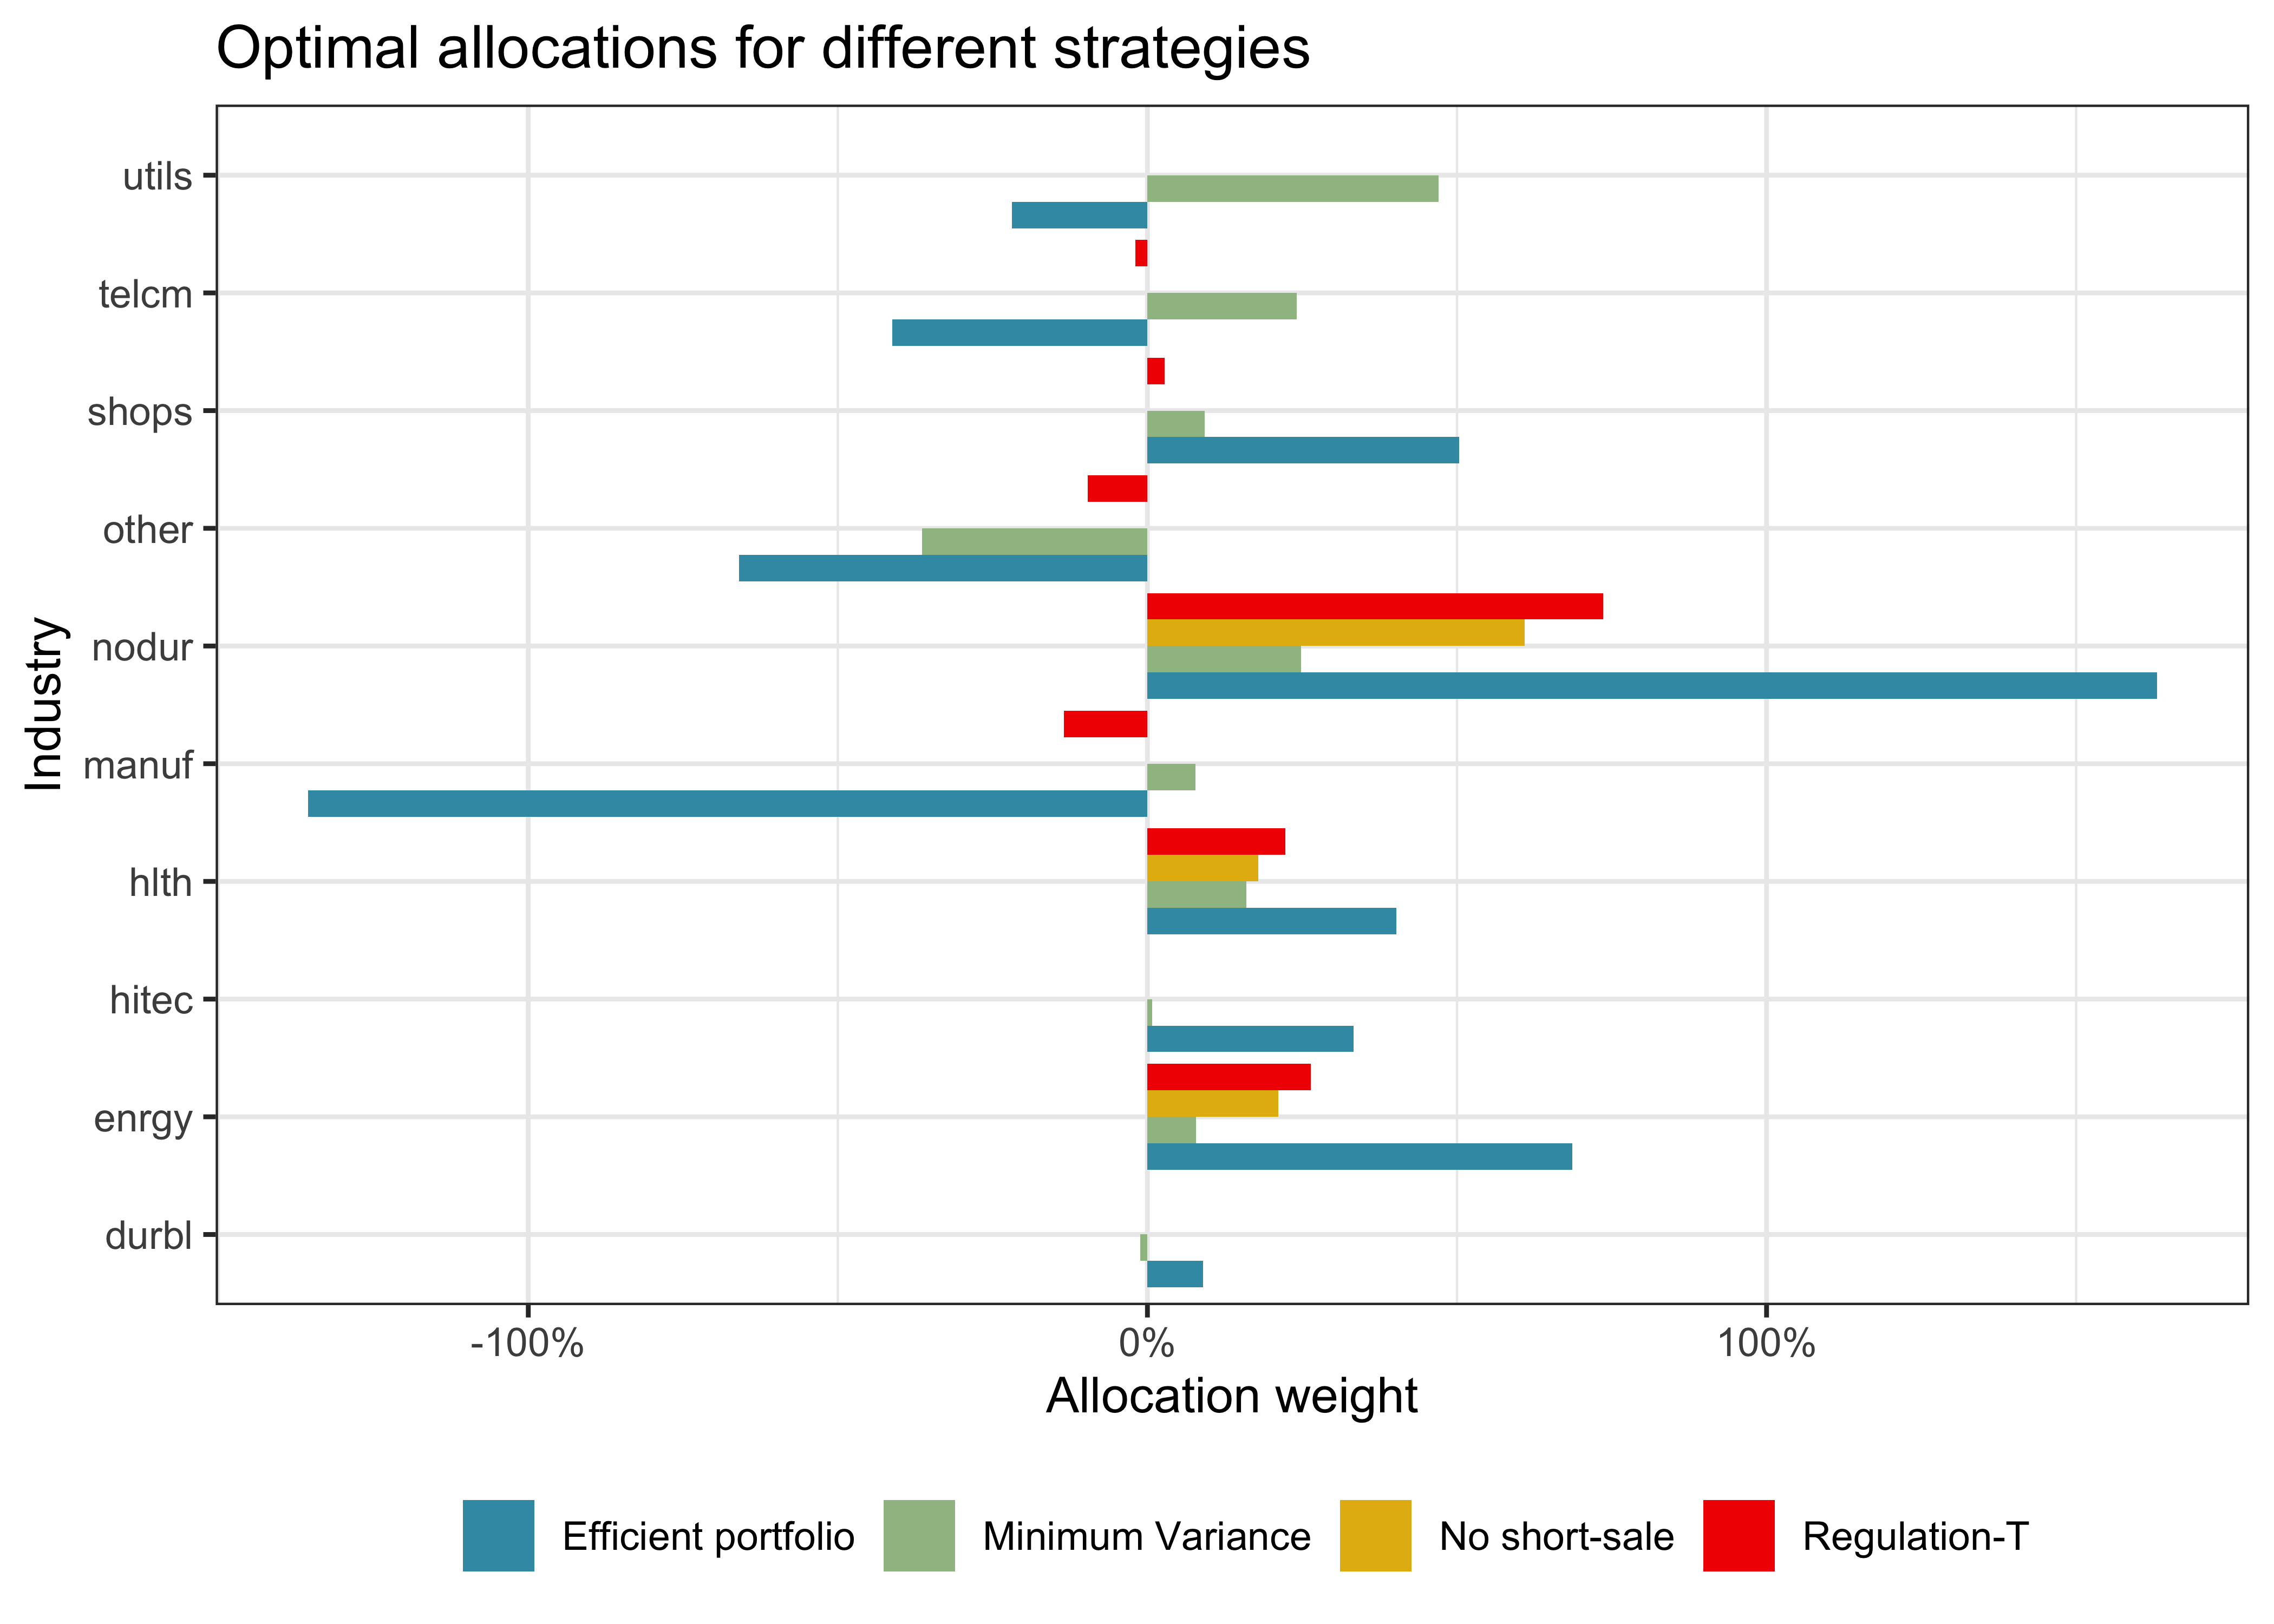 Title: Optimal allocations for different strategies. The figure shows the portfolio weights for the four different strategies across the 10 different industries. The figures indicate extreme long and short positions for the efficient portfolio.